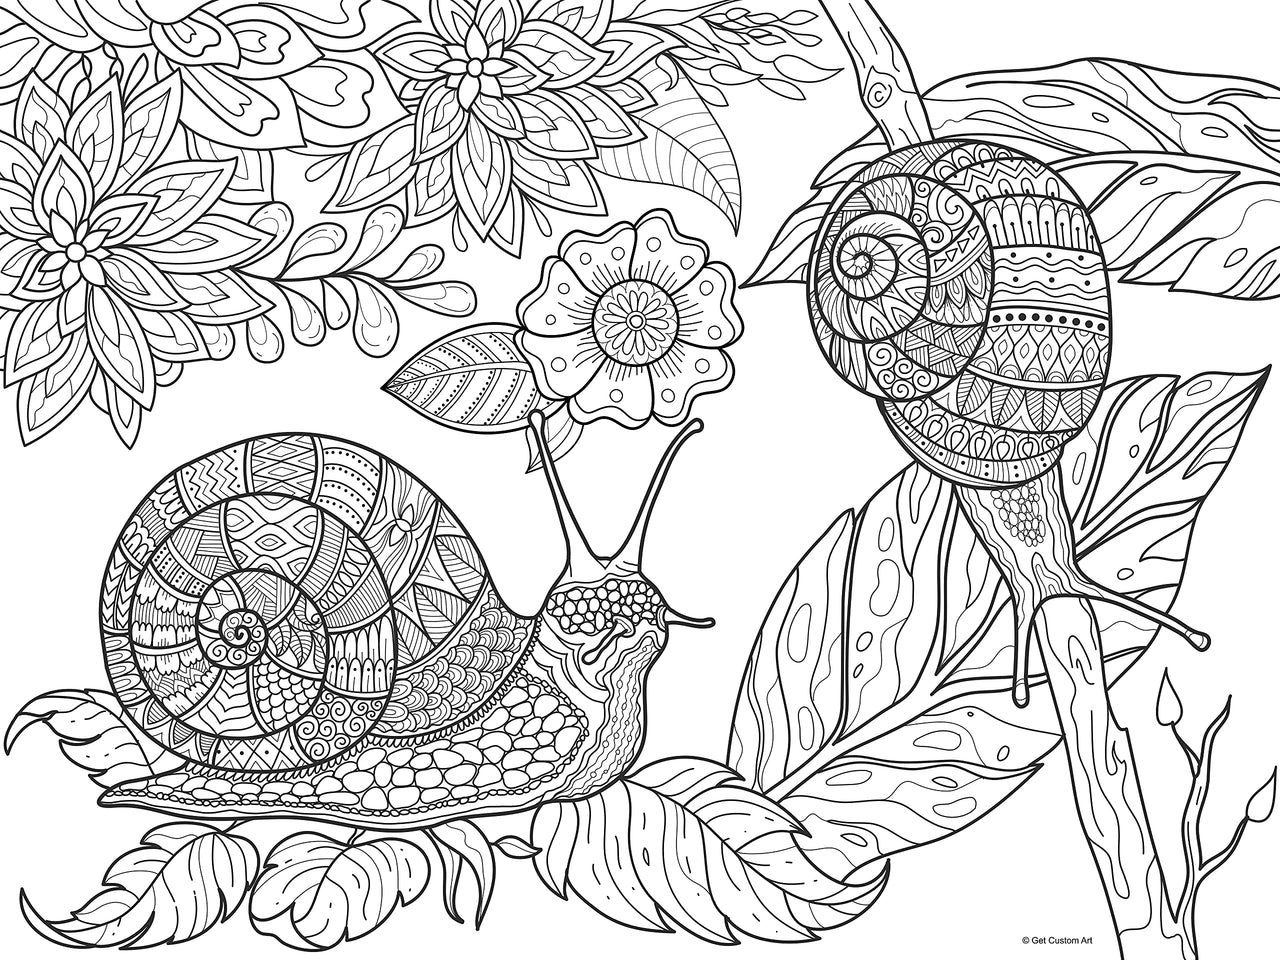 Snails Coloring Poster – Animal Art for Kids and Adults | DIY Stress Relief Coloring Poster